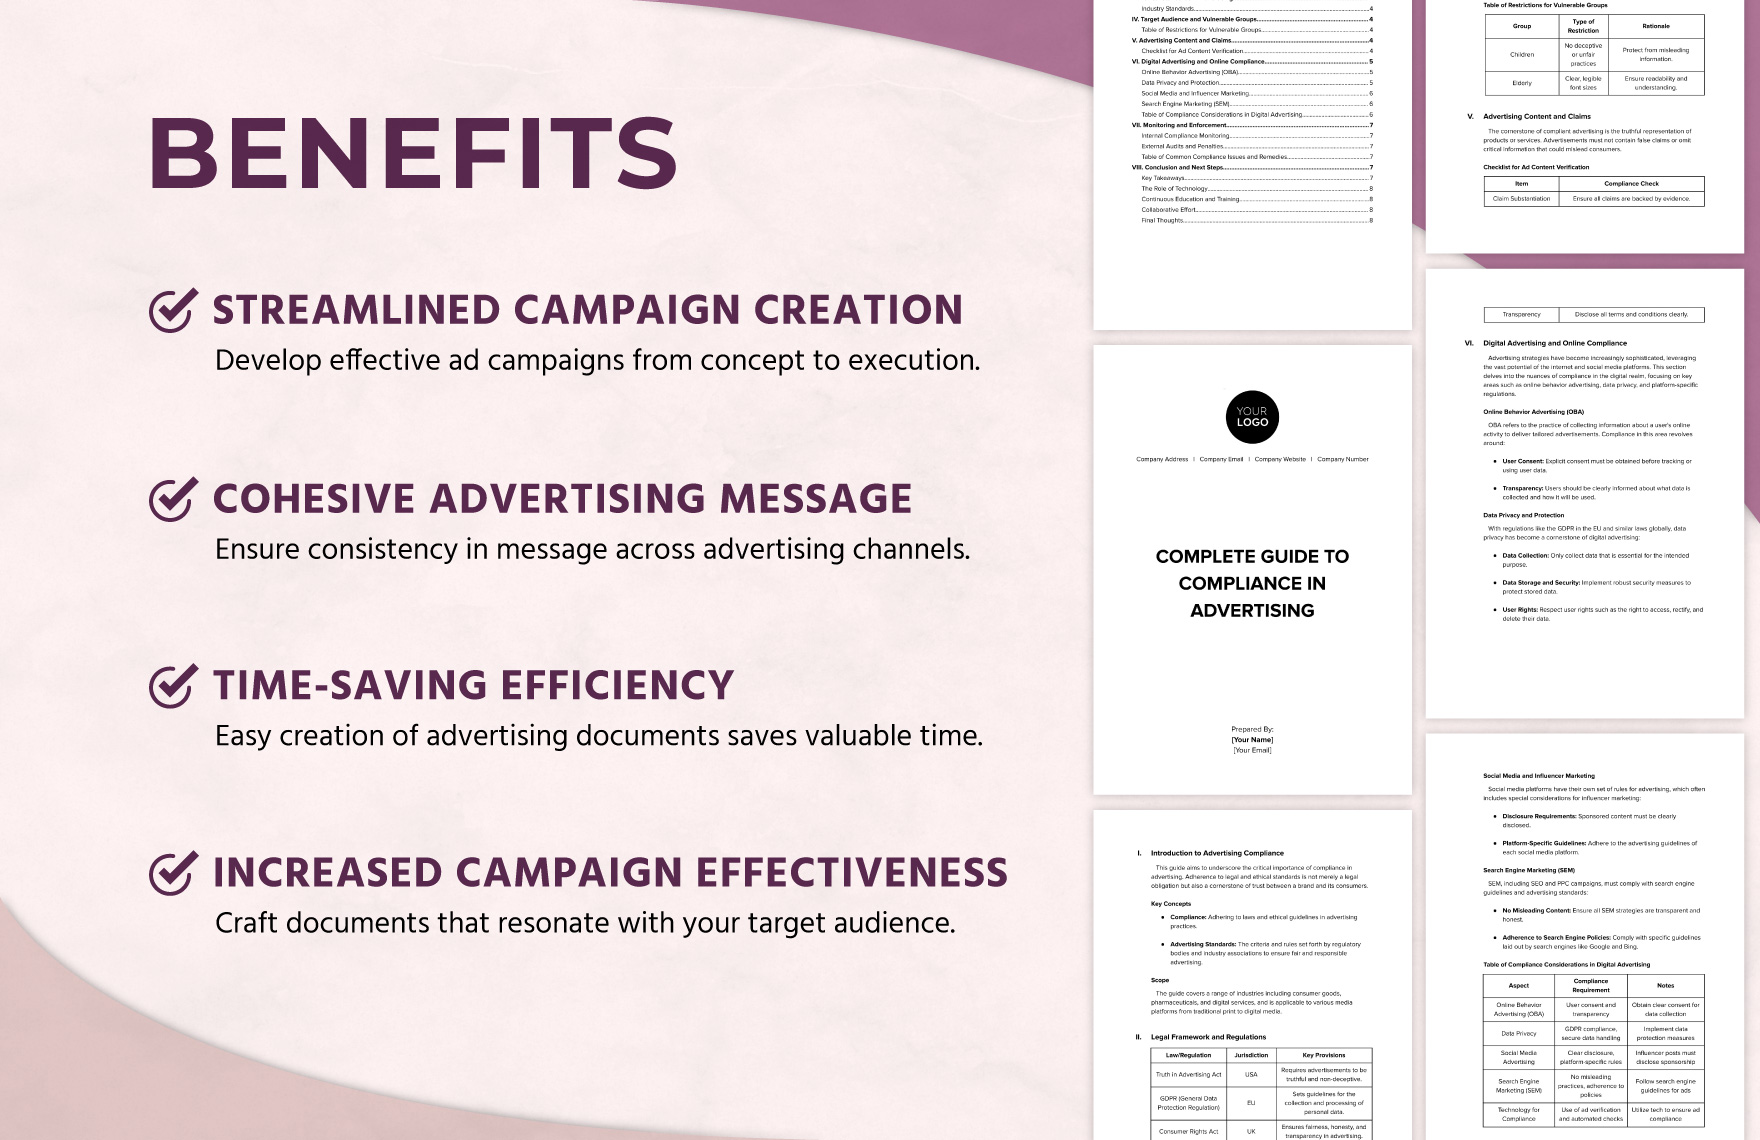 Complete Guide to Compliance in Advertising Template